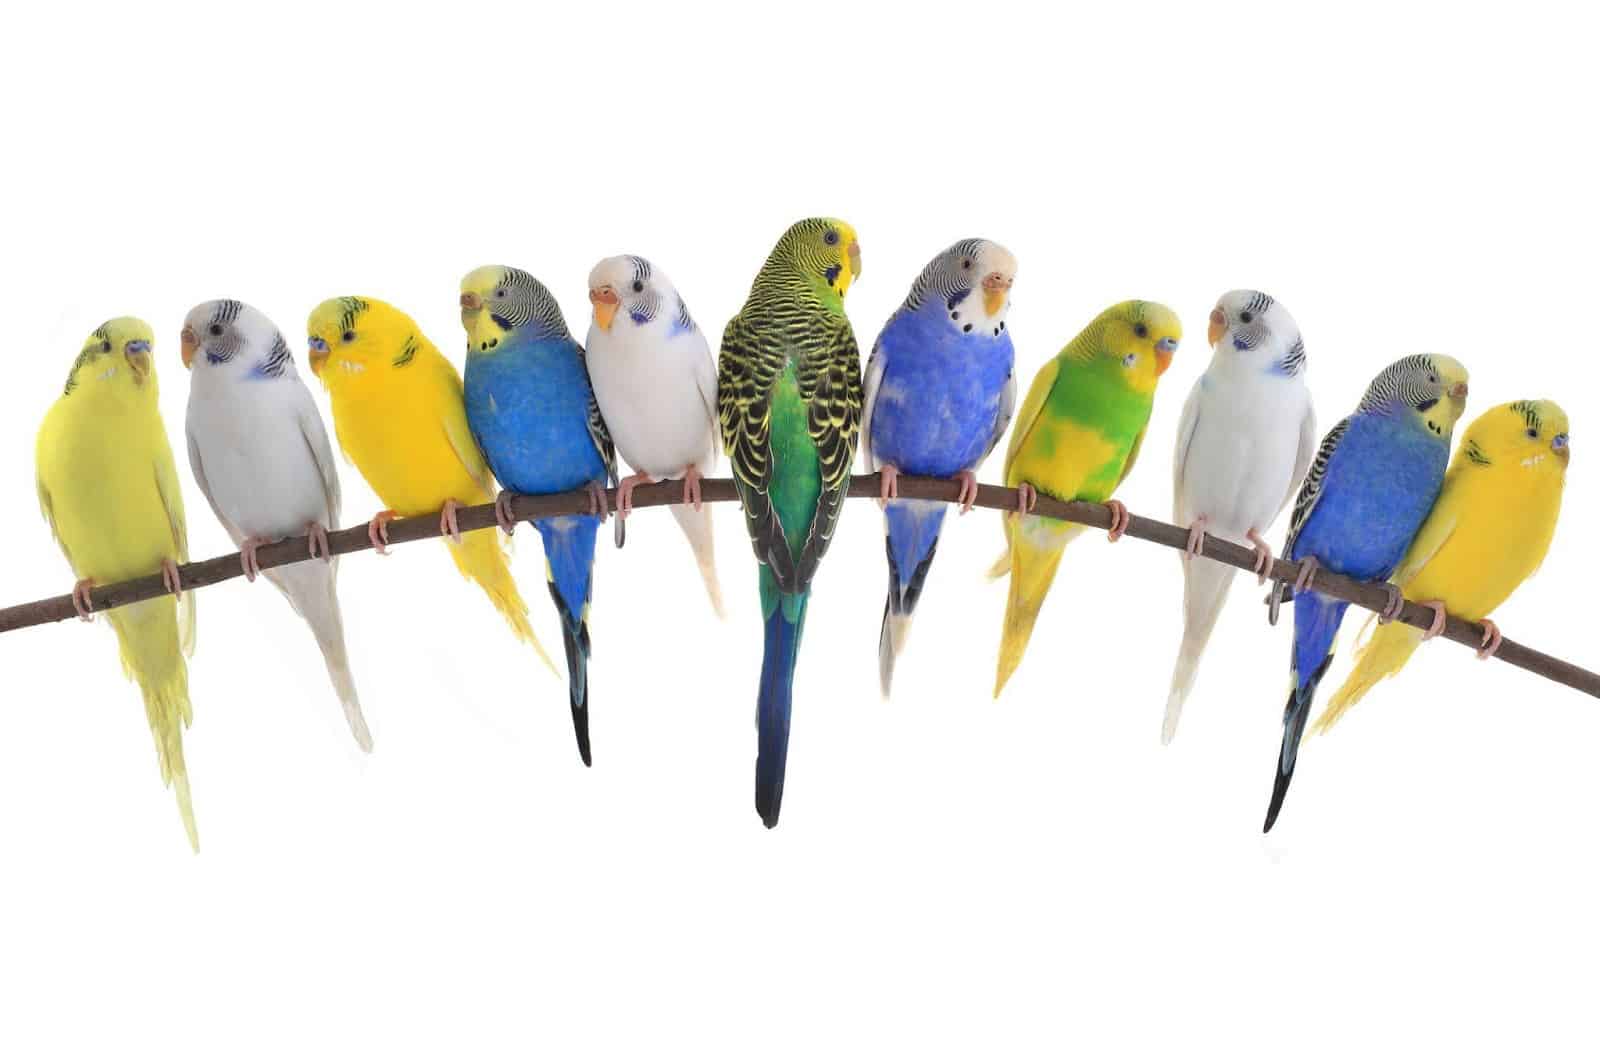 The White Budgie guide by Petrestart.com.